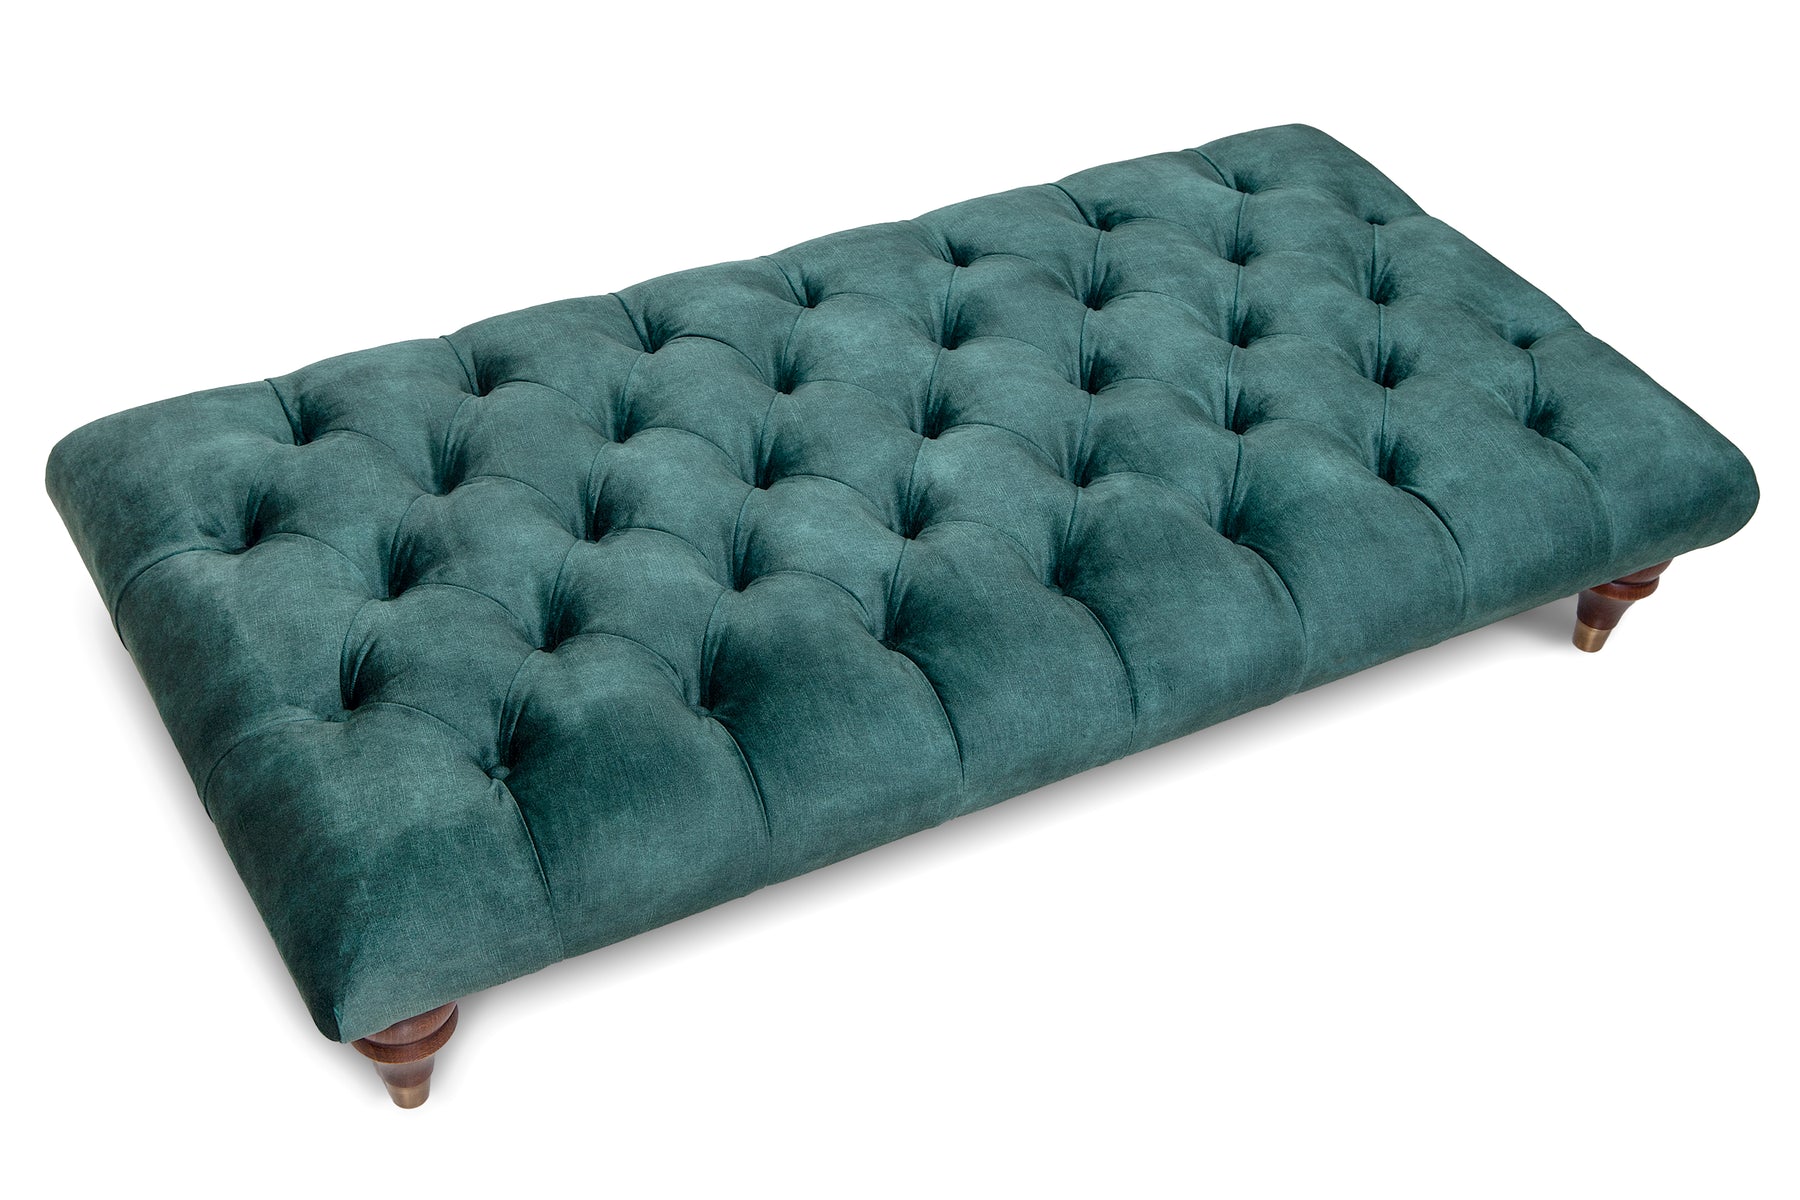 Pembroke Chesterfield Upholstered Footstool / Coffee Table